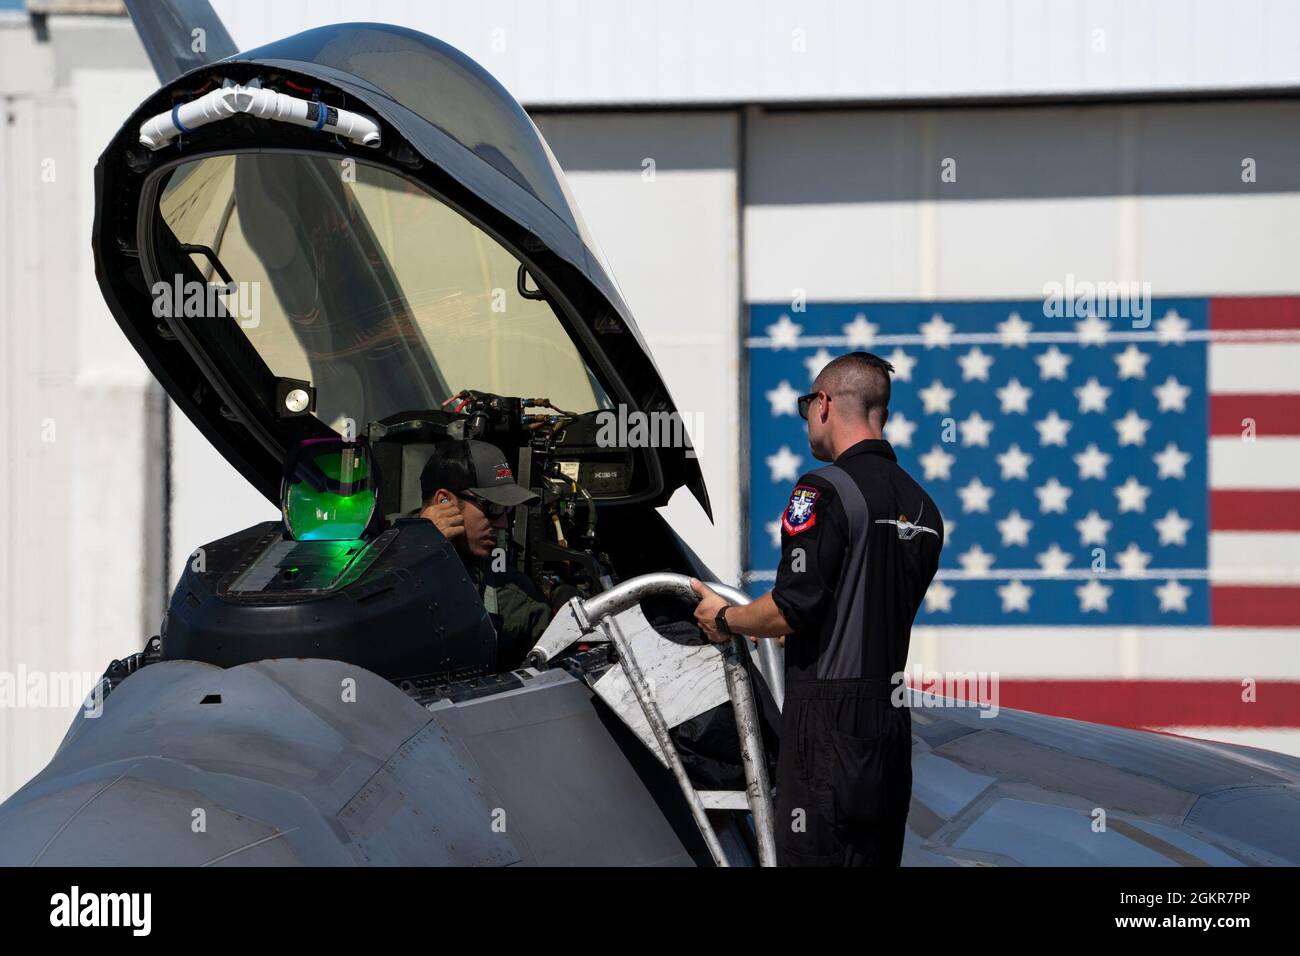 U.S. Air Force Maj. Josh Gunderson, F-22 Demo Team commander, speaks with Tech. Sgt. Lenny Buscemi, F-22 Demo Team crew chief, upon arrival at Wallops Island Flight Facility NASA hanger June 17, 2021, at Wallops Island, Va. Crew chiefs like Buscemi are responsible for all the mechanical maintenance of the aircraft, and ensure the F-22 Raptor demonstration is conducted on time during an airshow. Stock Photo